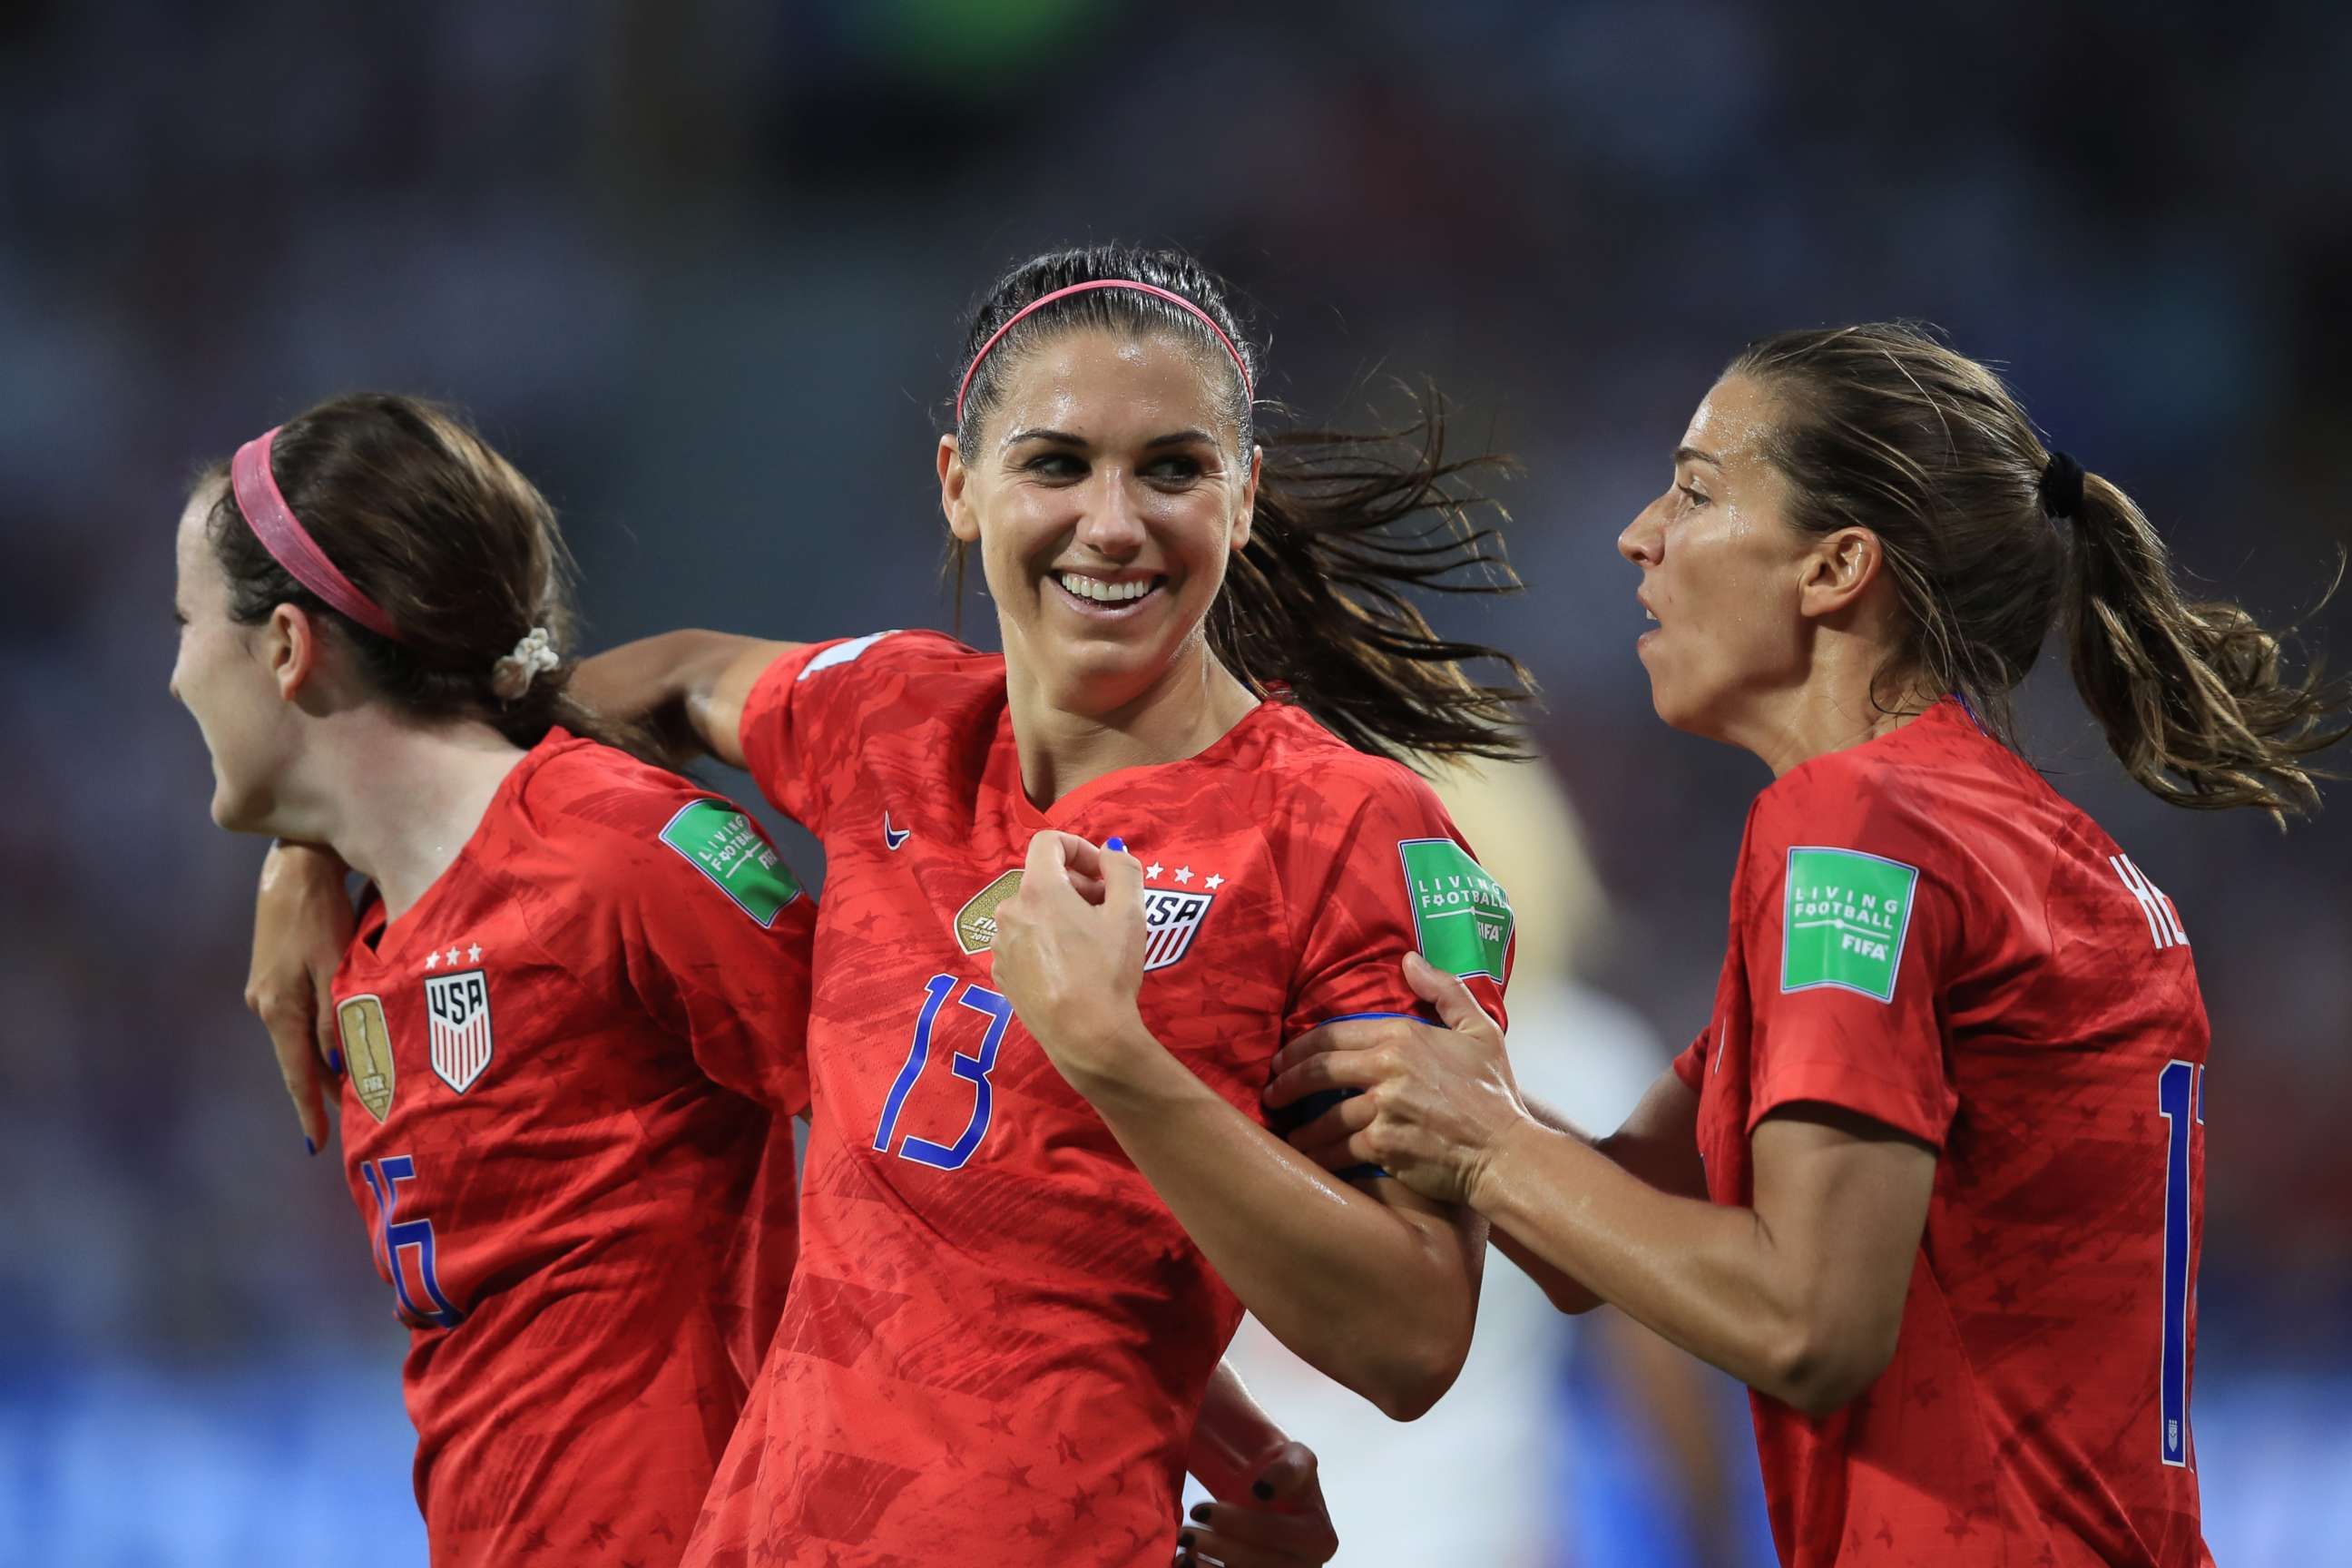 USA Soccer Star Alex Morgan On How Sports Made Her Confident